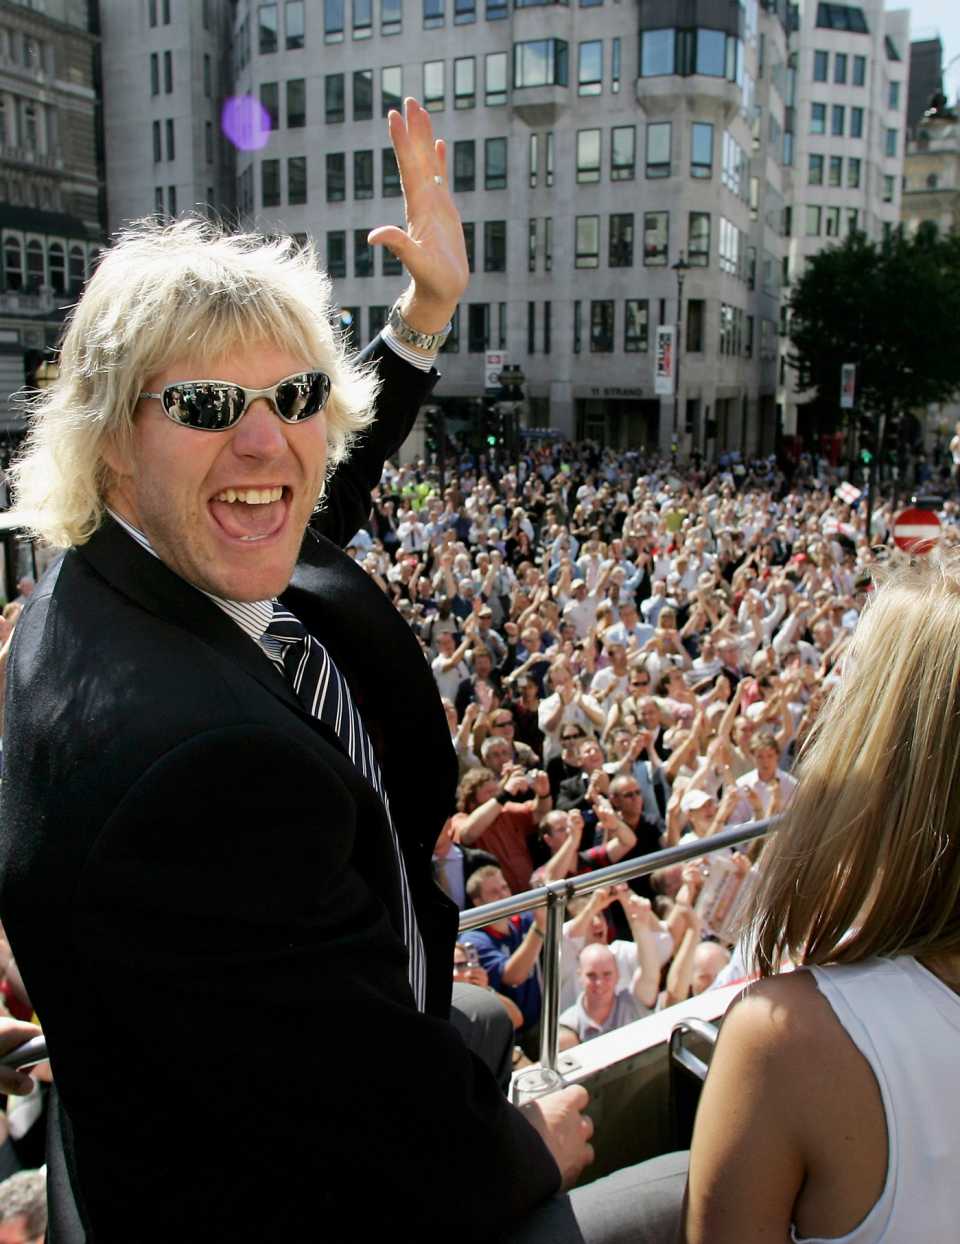 Matthew Hoggard waves to the crowd during the Ashes celebrations